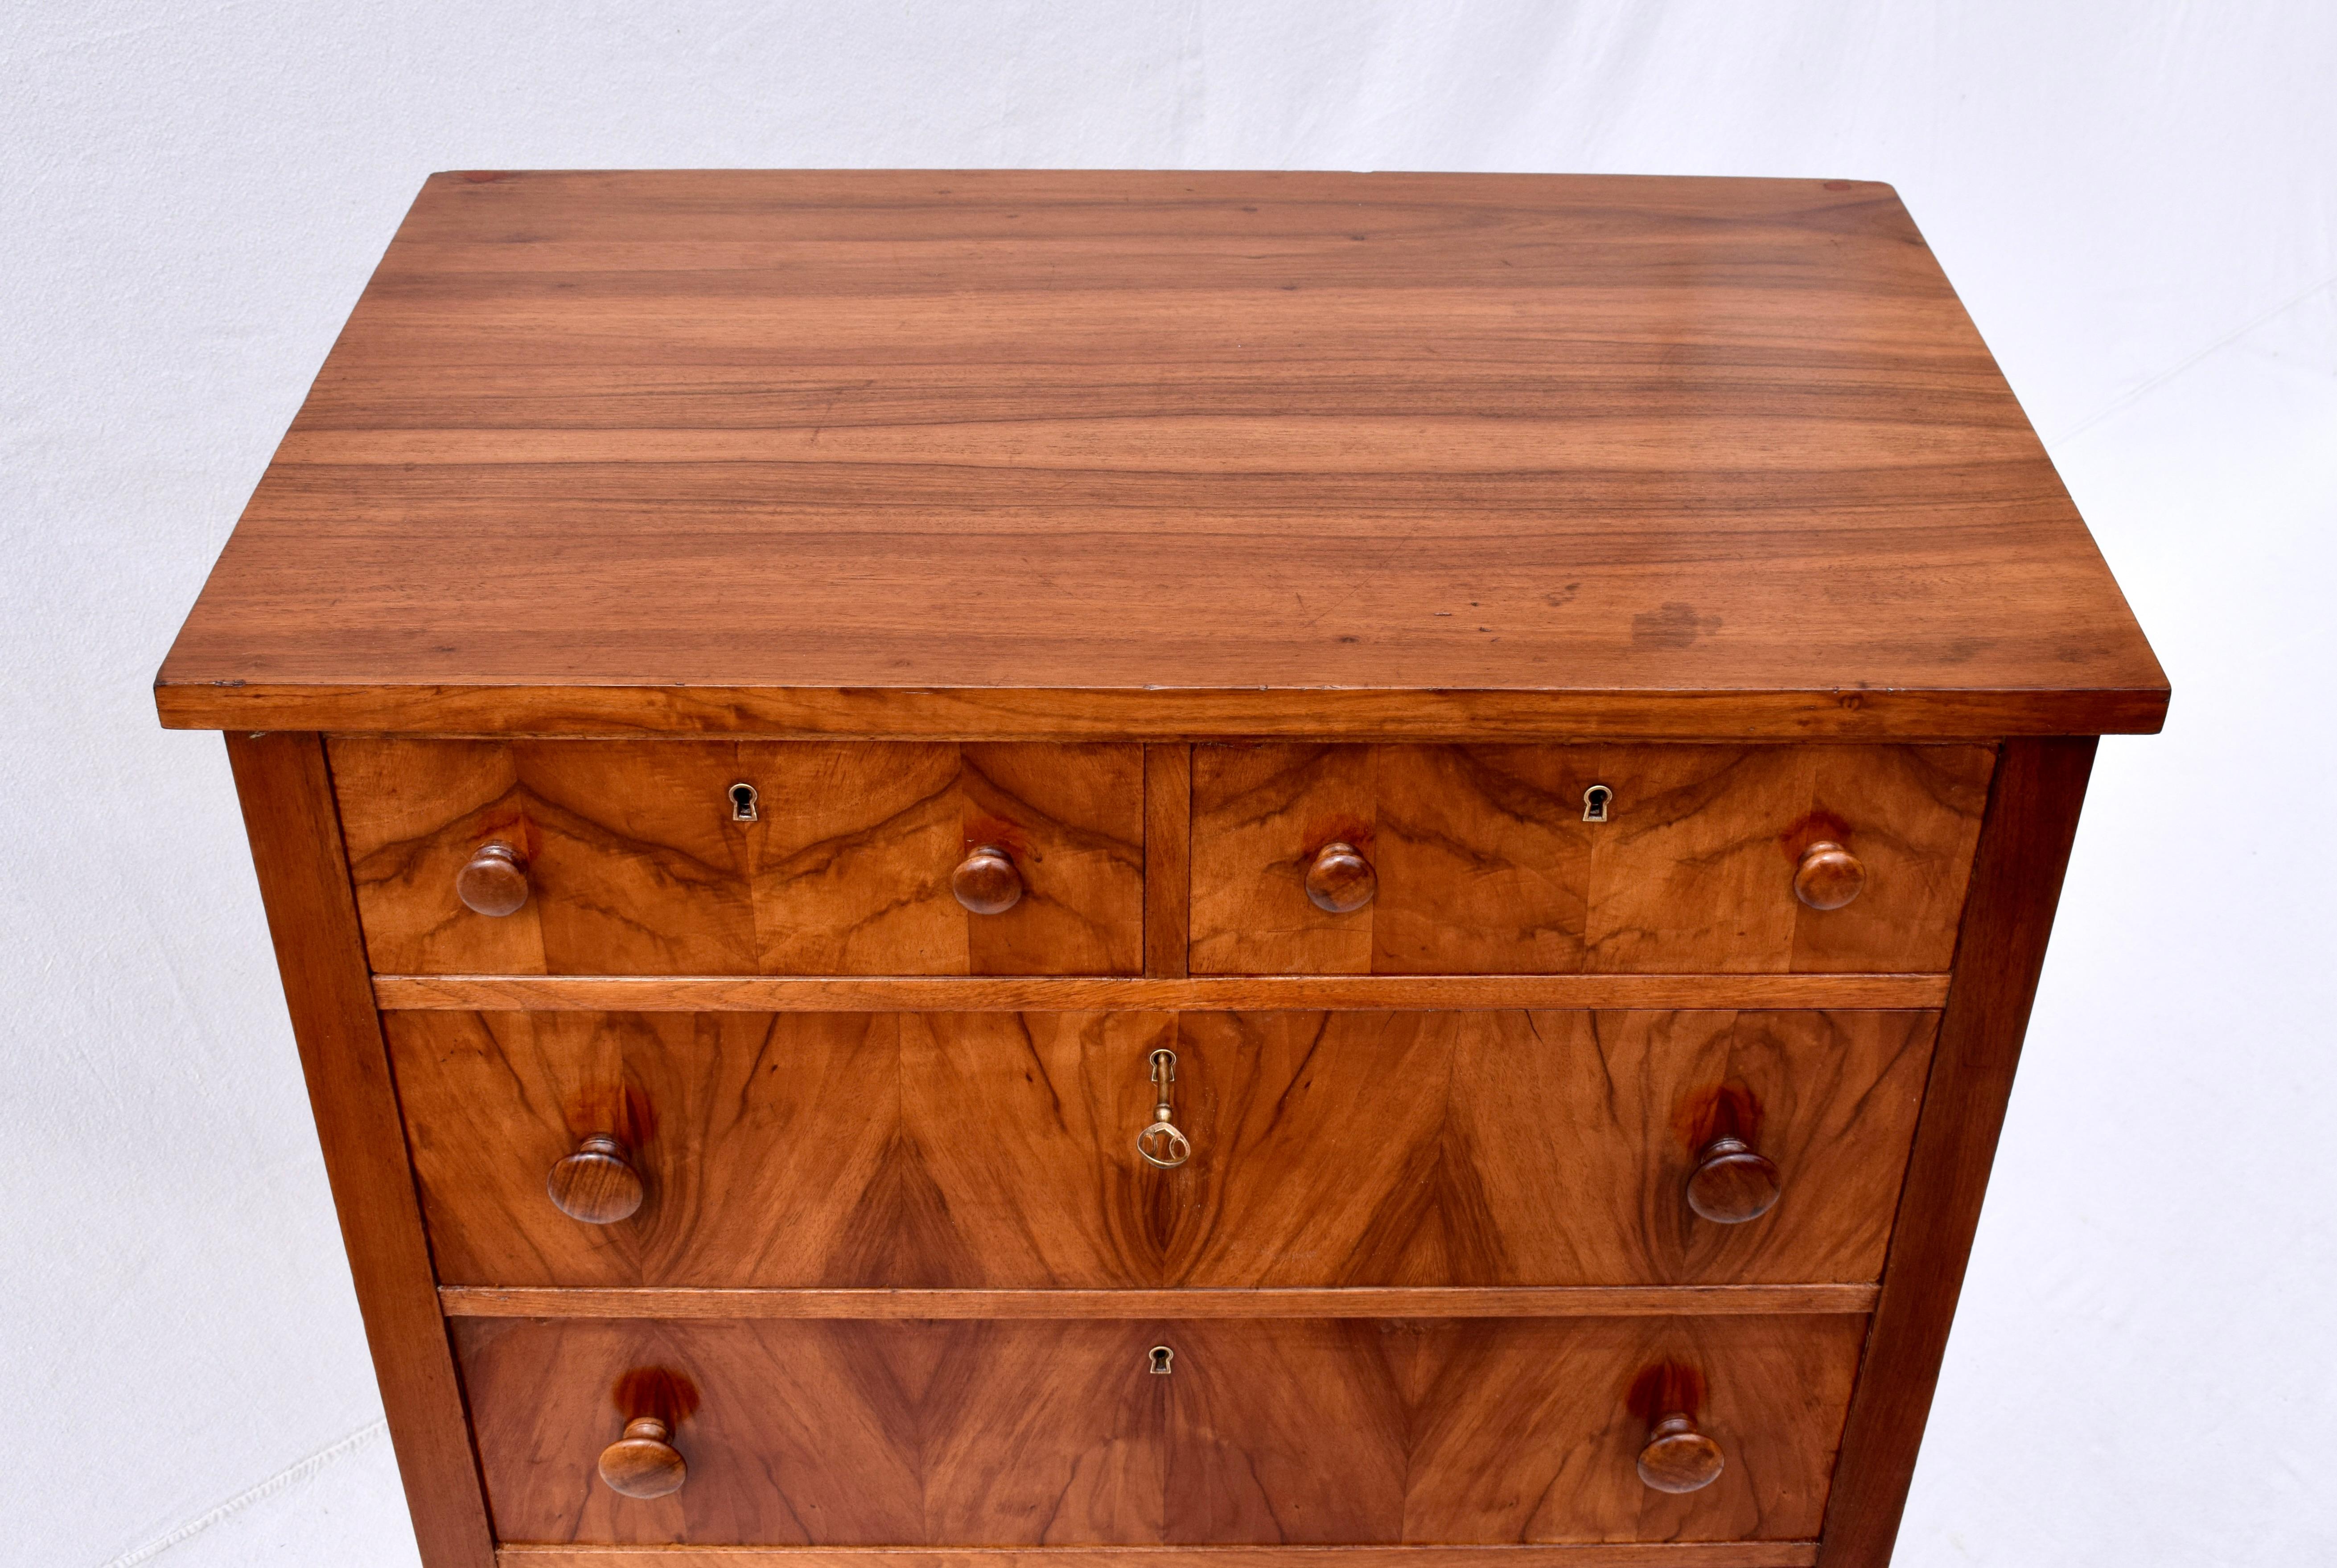 Hepplewhite Book-Matched Flame Mahogany Chest of Drawers on Casters